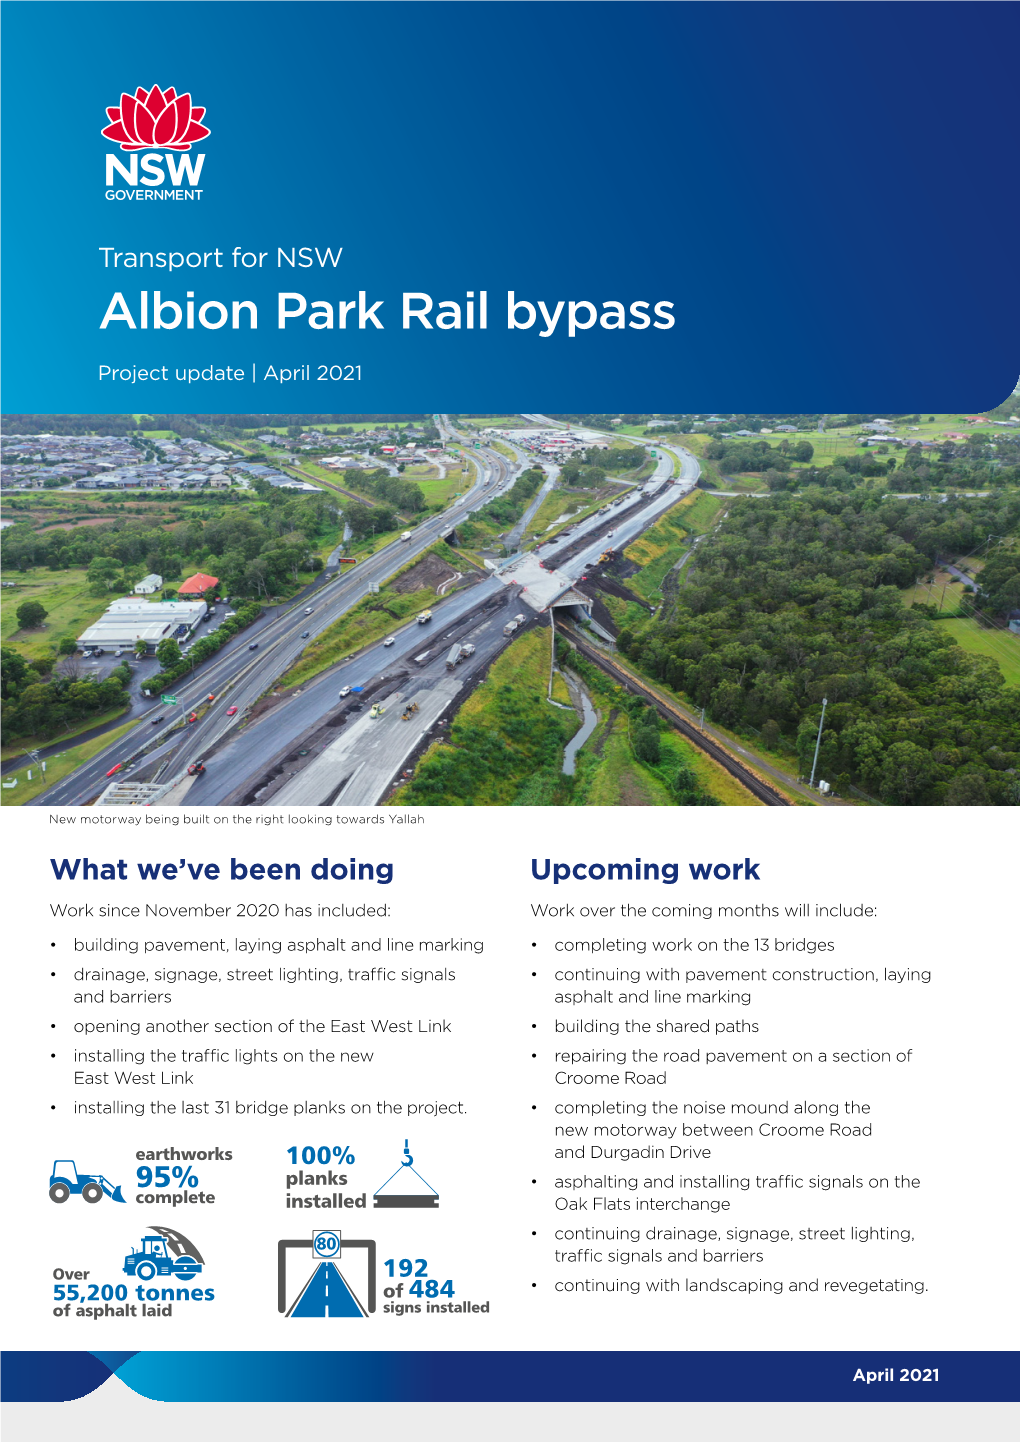 Albion Park Rail Bypass Project Update